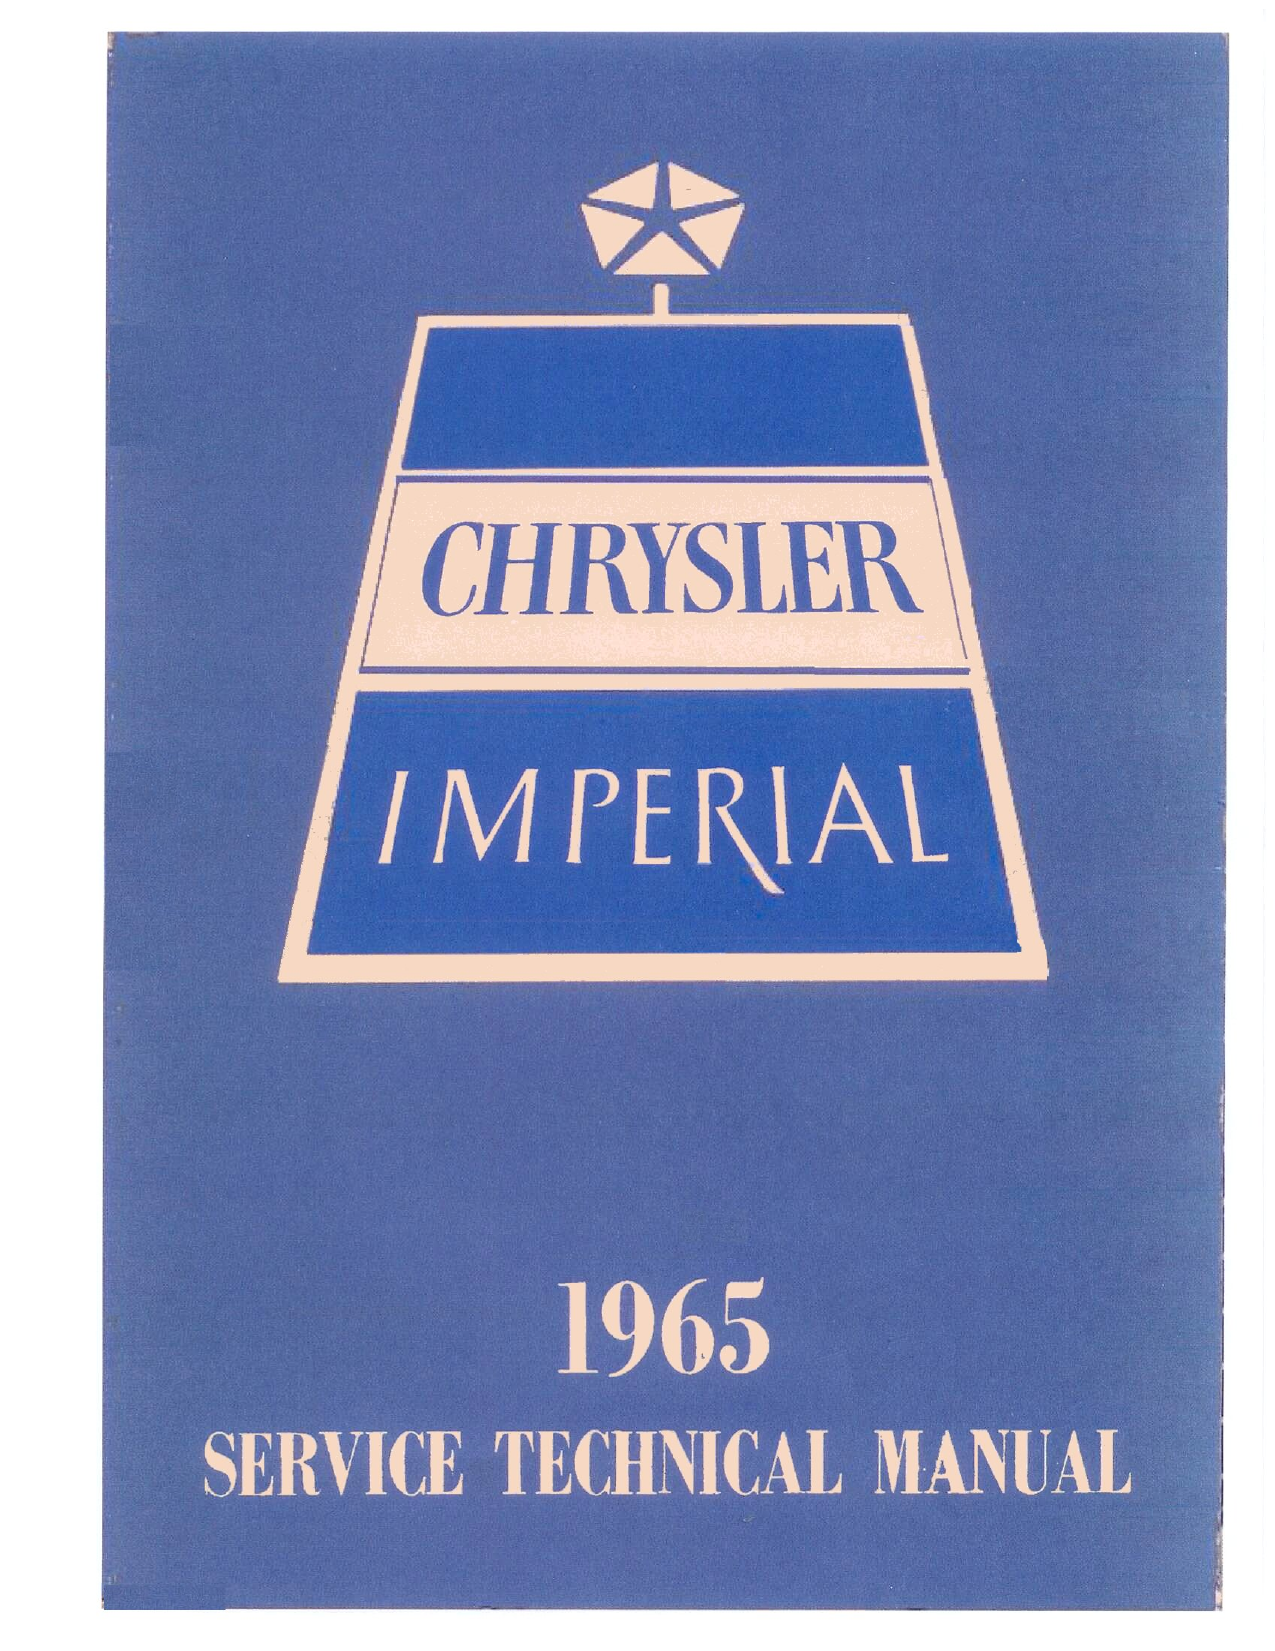 Chrysler Imperial 1965 Service – Technical Manual | Manualzz